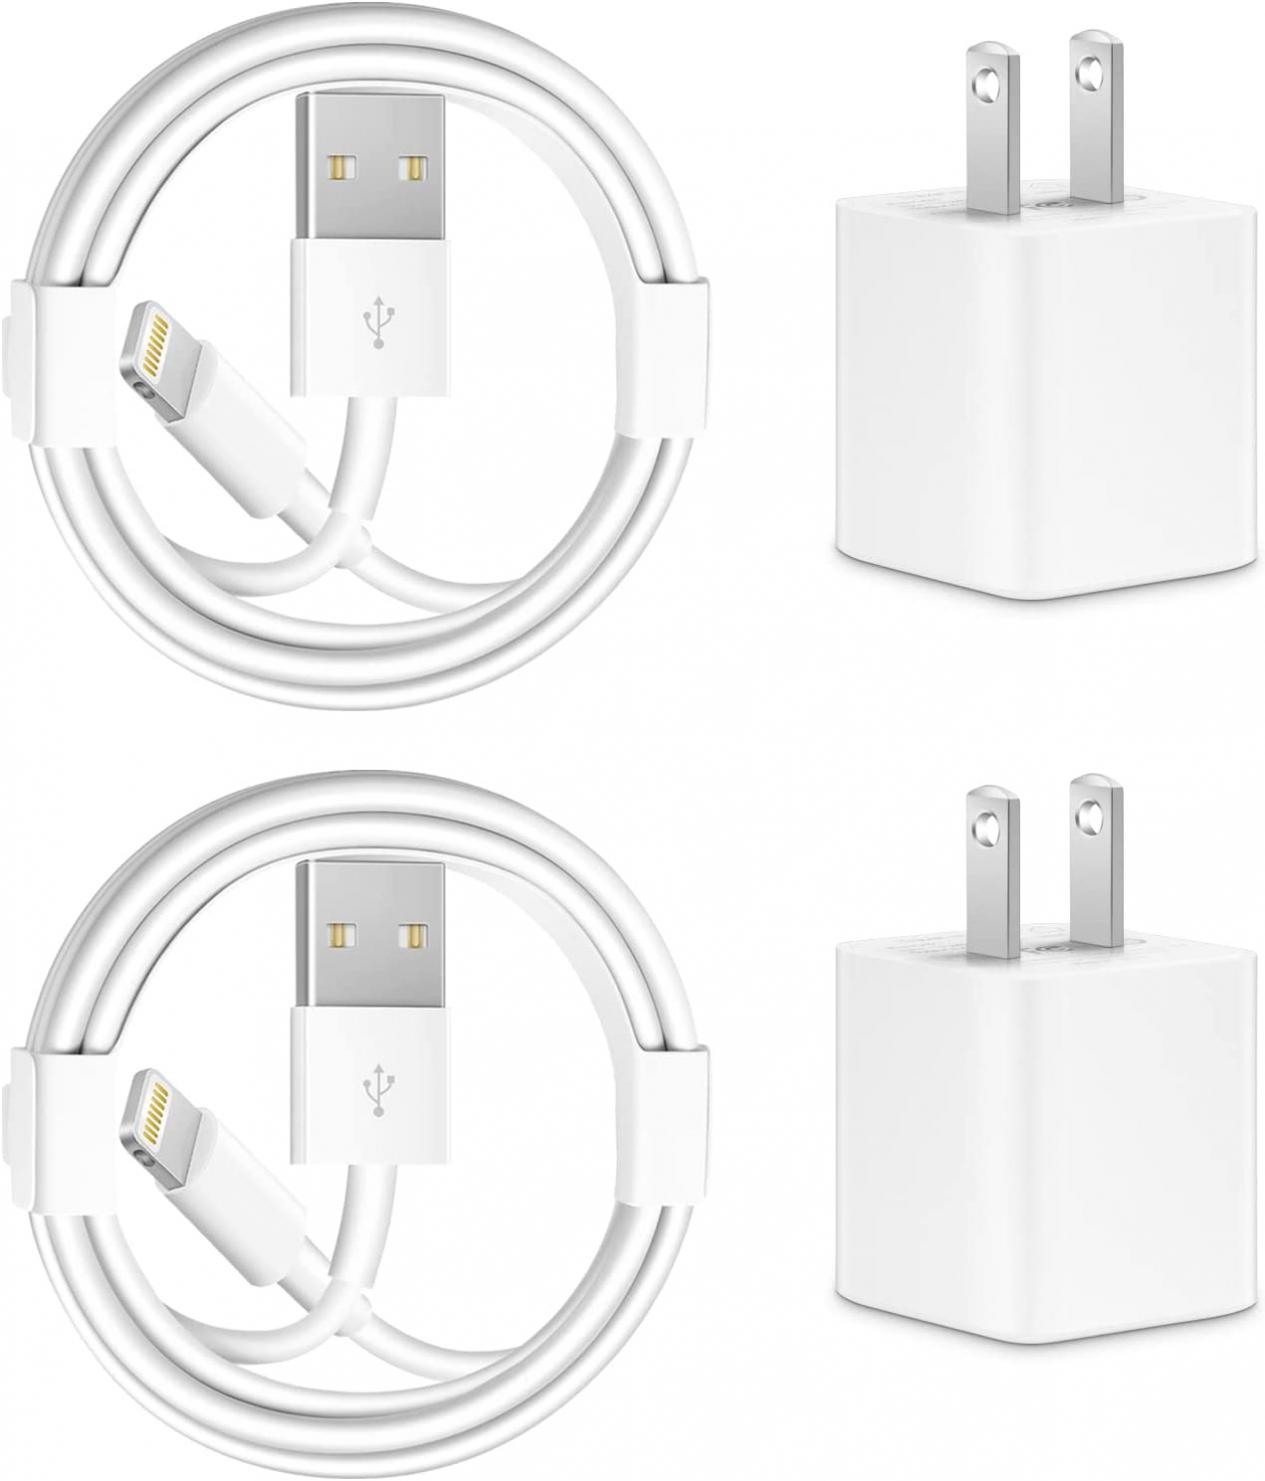 [Apple MFi Certified] iPhone Charger,2Pack 6FT USB to Lightning Cable Quick Fast Charging Cord USB Wall Chargers Power Adapter for iPhone 13/12/11/X/8 Plus/XR/XS Max/SE/iPad